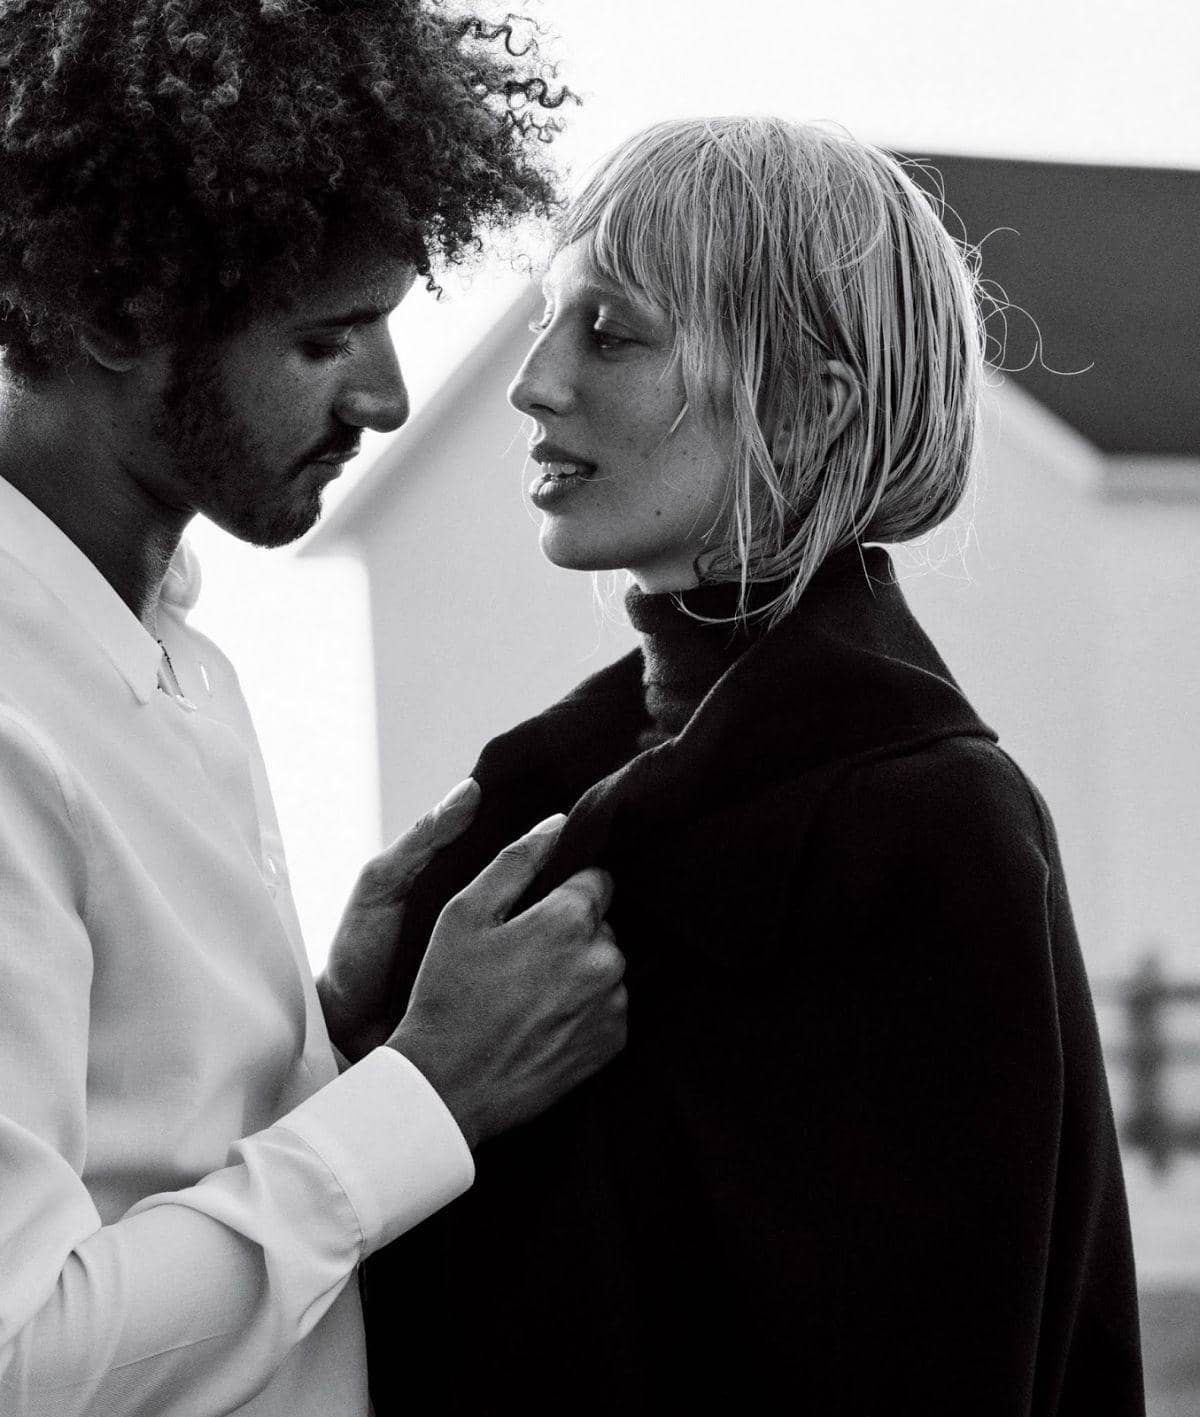 Fall in Love With These Autumn Styles: Lili Sumner & Ahmed Elramly by Christian Macdonald for WSJ Magazine October 2020 Clothing: Hermes shirt; Ralph Lauren Collection coat, turtleneck